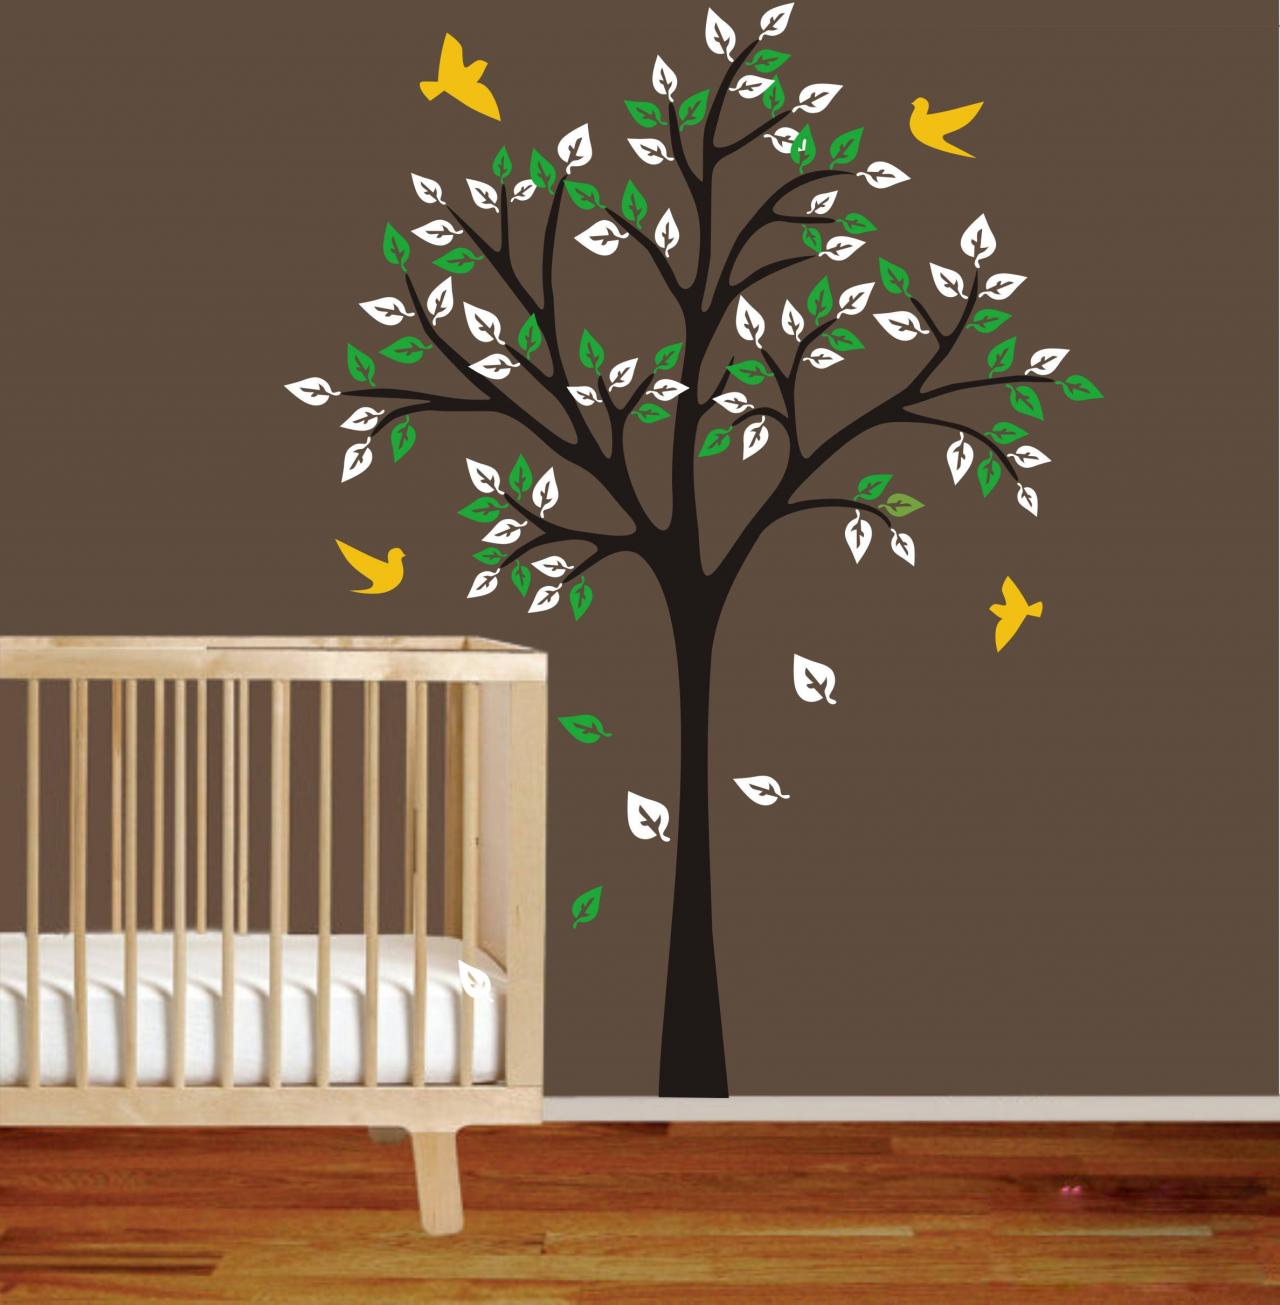 One Simple Tree Cute Birds Wall Decal Vinyl Flying Bird Leaf Bedroom Man Home Decals Wall Sticker Stickers Kids Room Bed Baby Kid H871